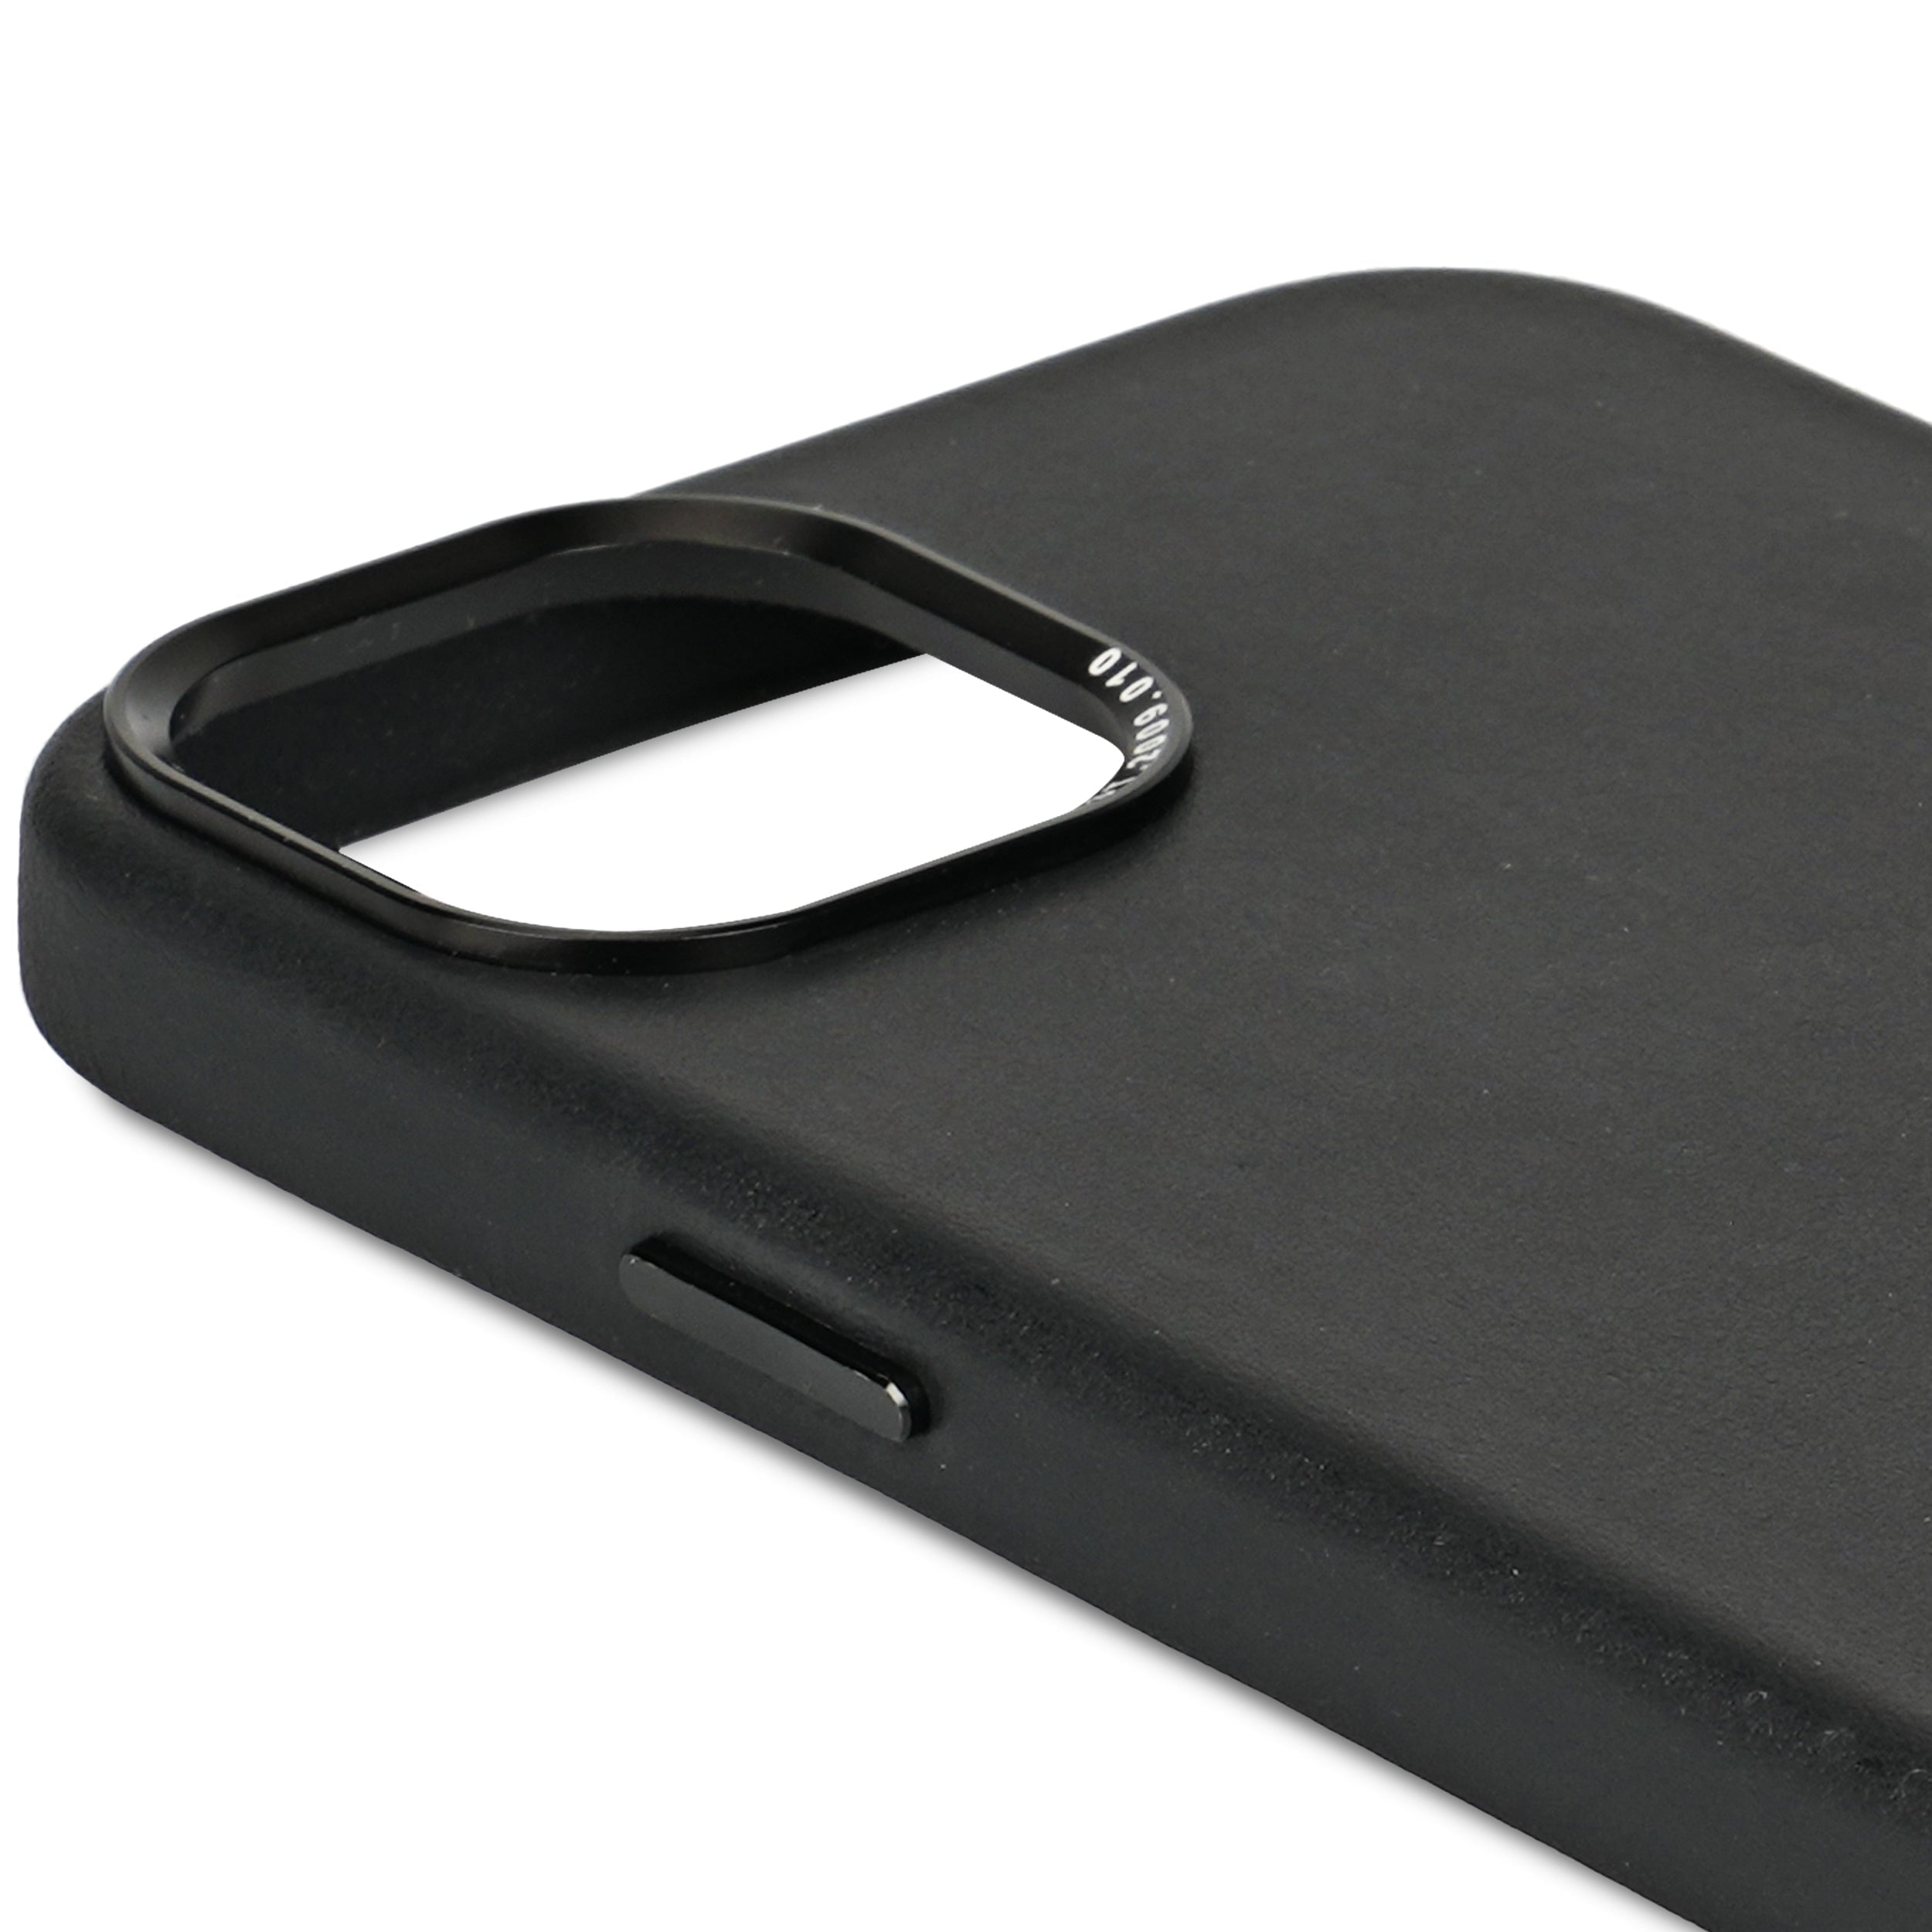 Black Leather iPhone 11 Pro Max Cover, iPhone Cases